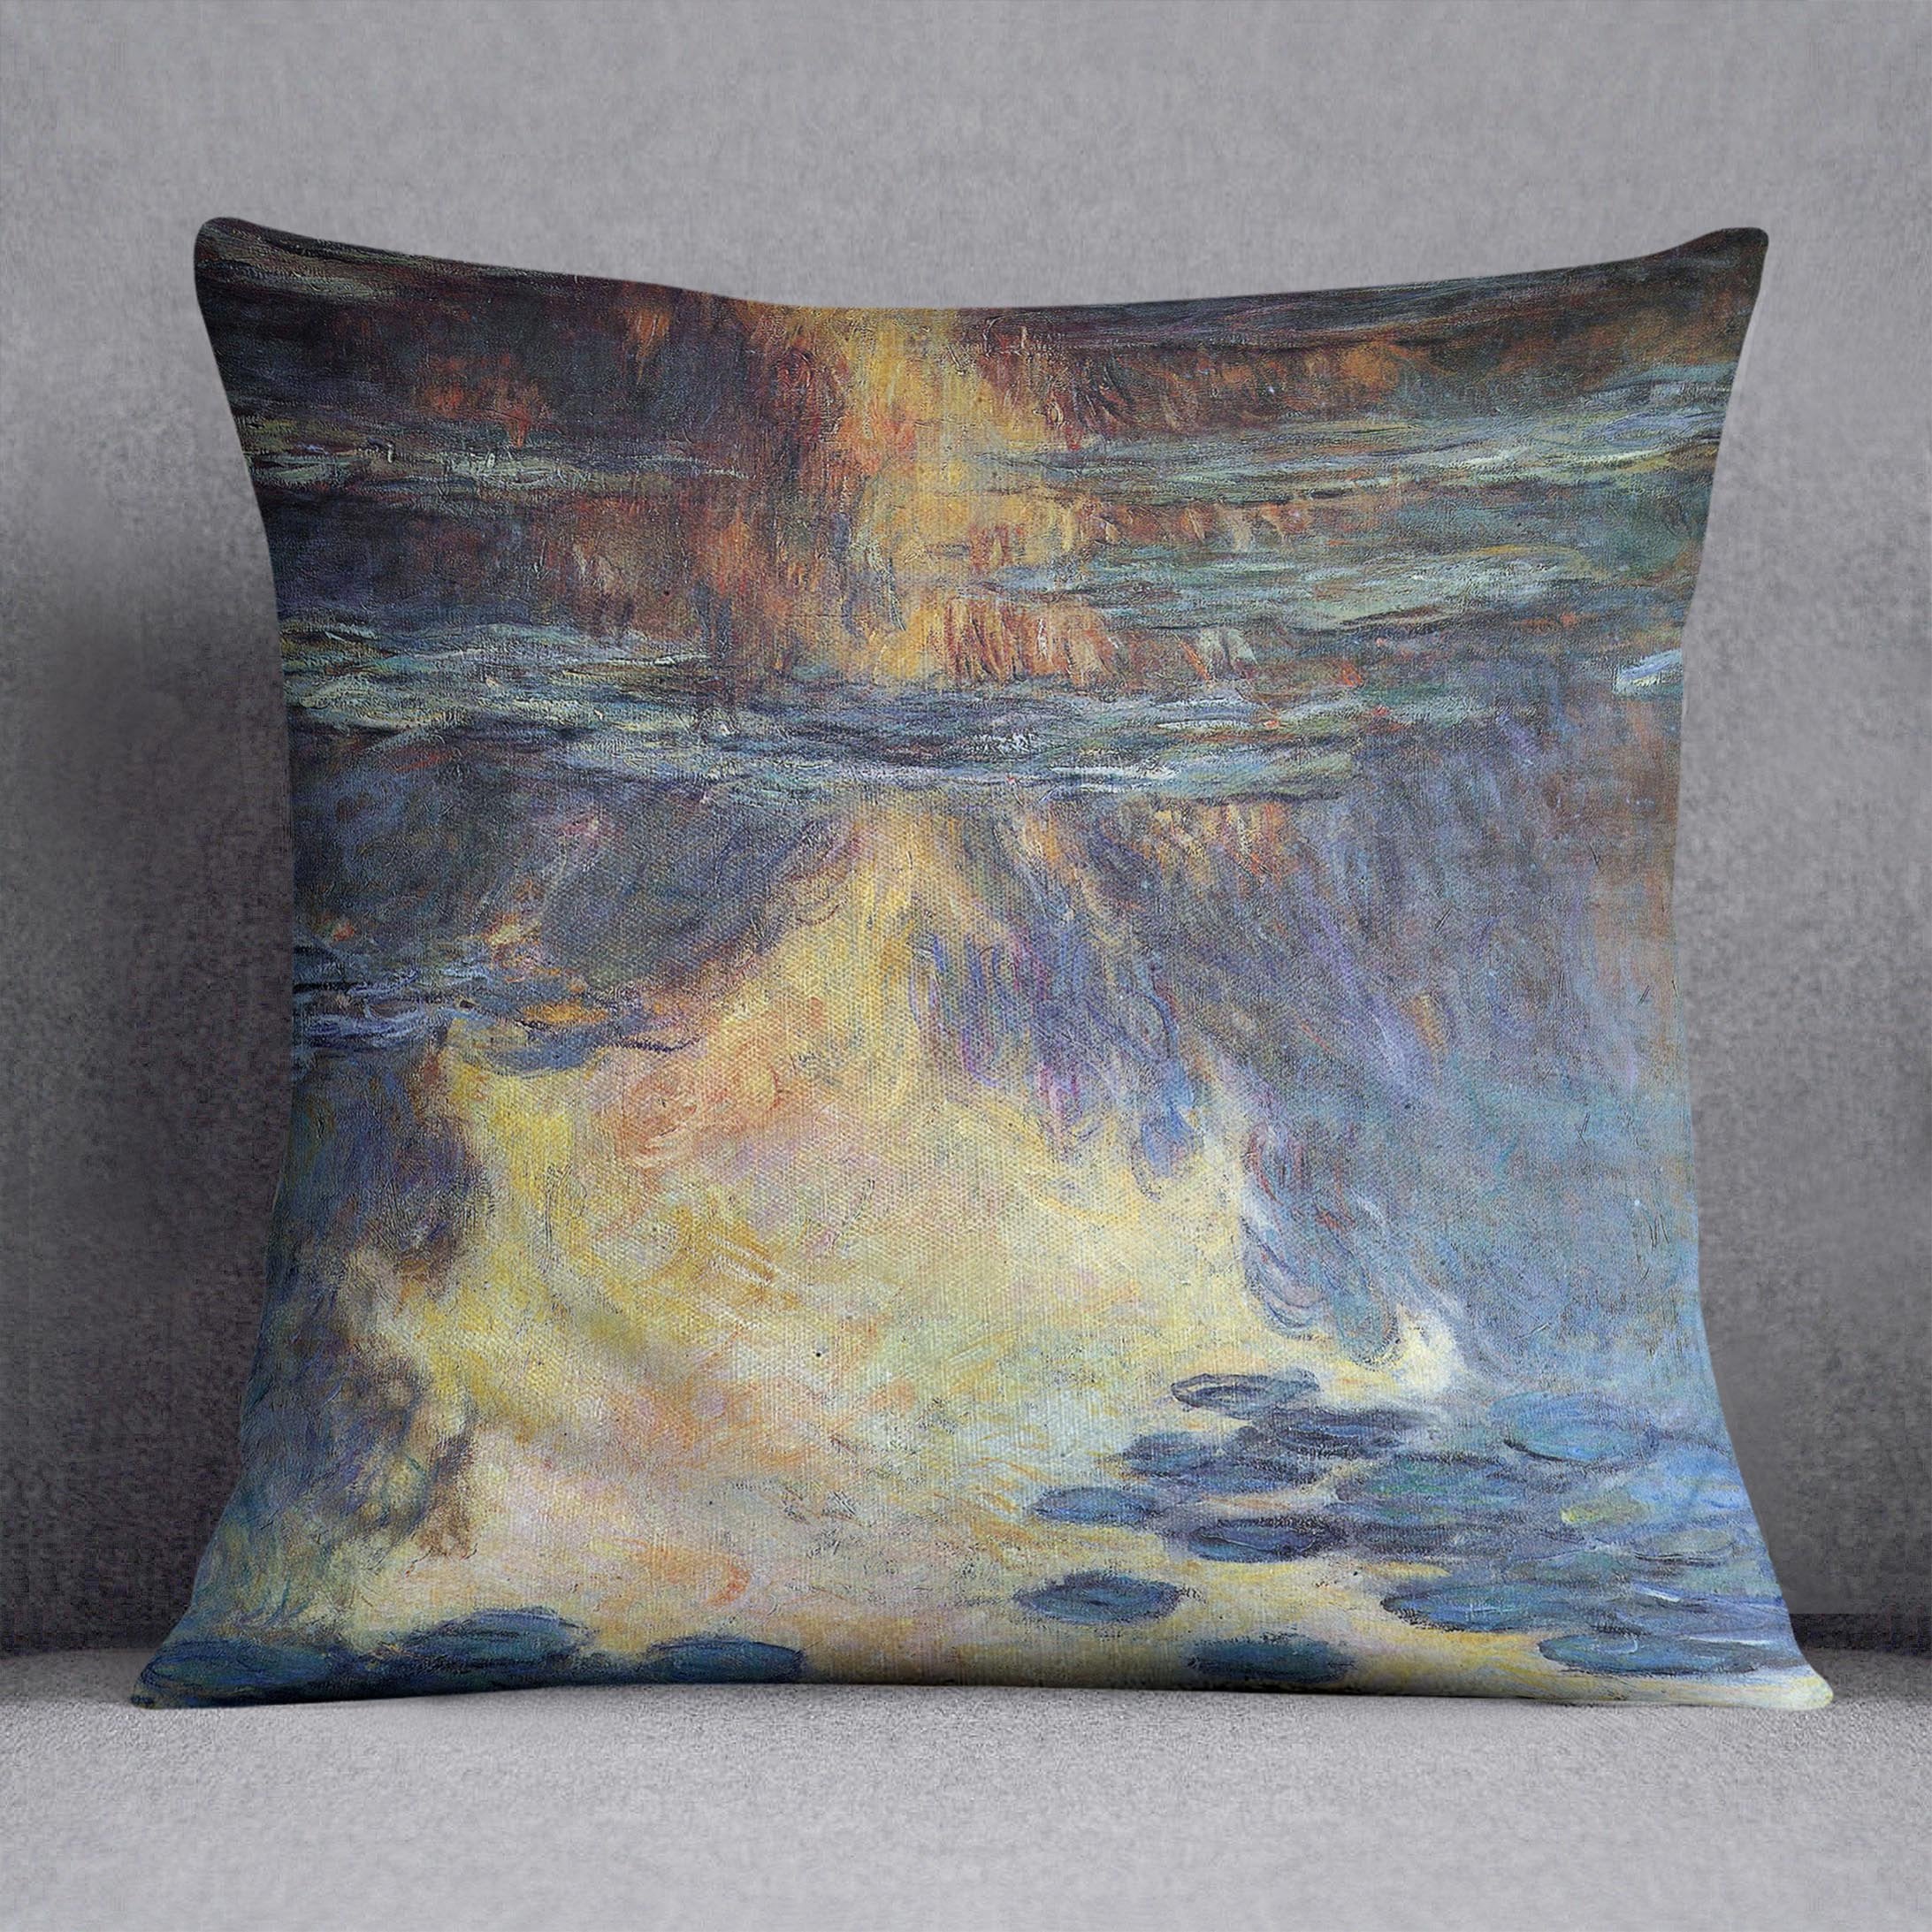 Water lilies water landscape 2 by Monet Throw Pillow